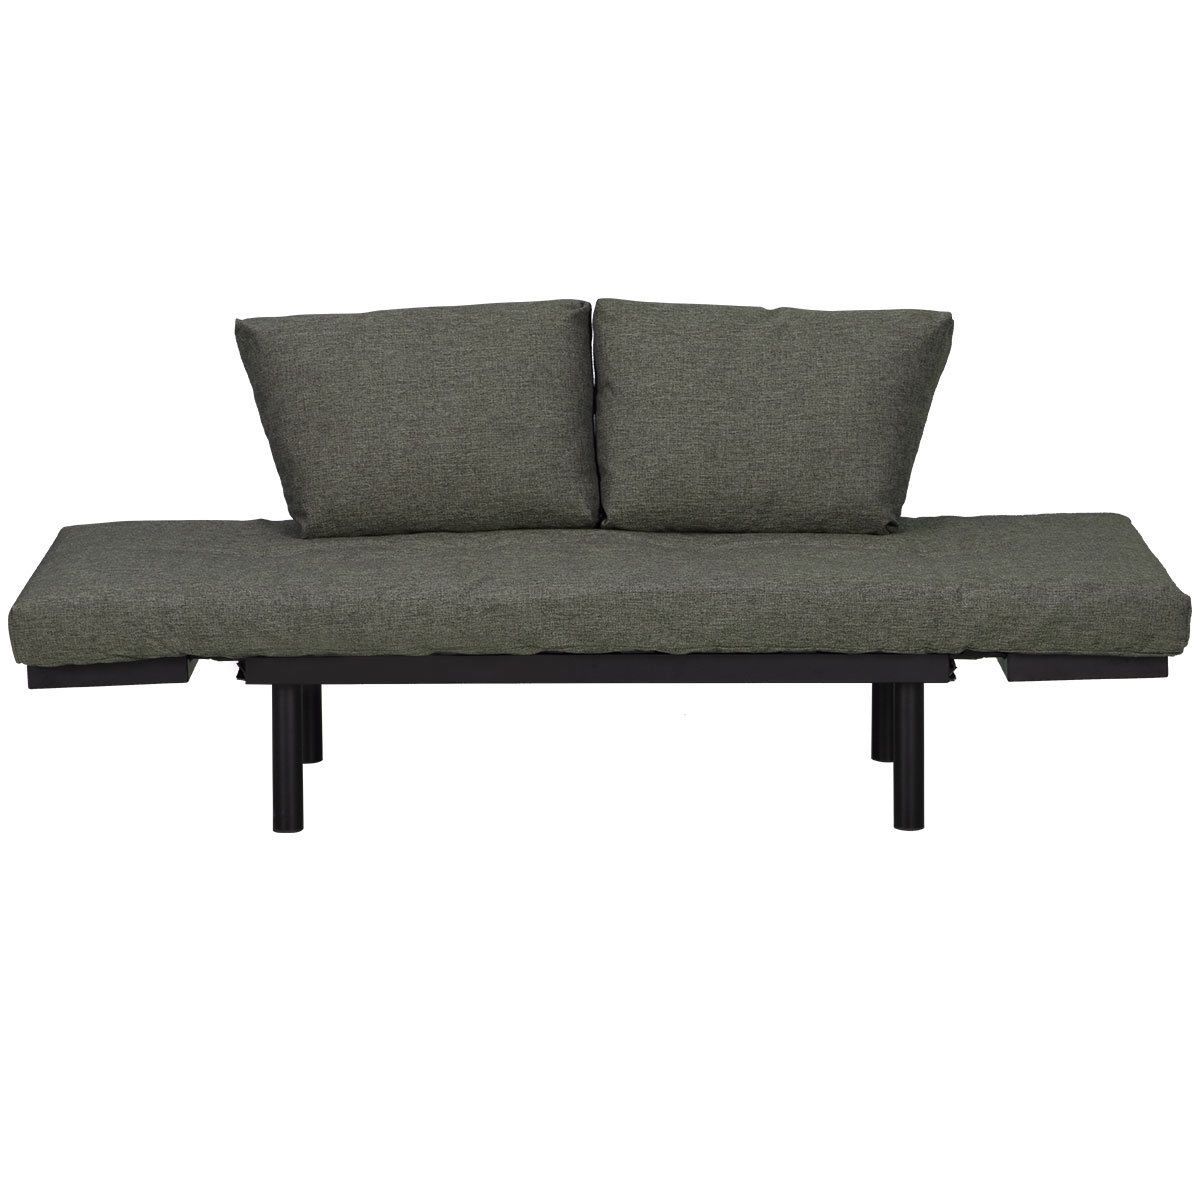 Costway: Costway Futon Sofa Sleeper Loveseat Convertible Sofa Bed Inside Trendy Convertible Sofa Chair Bed (View 14 of 20)